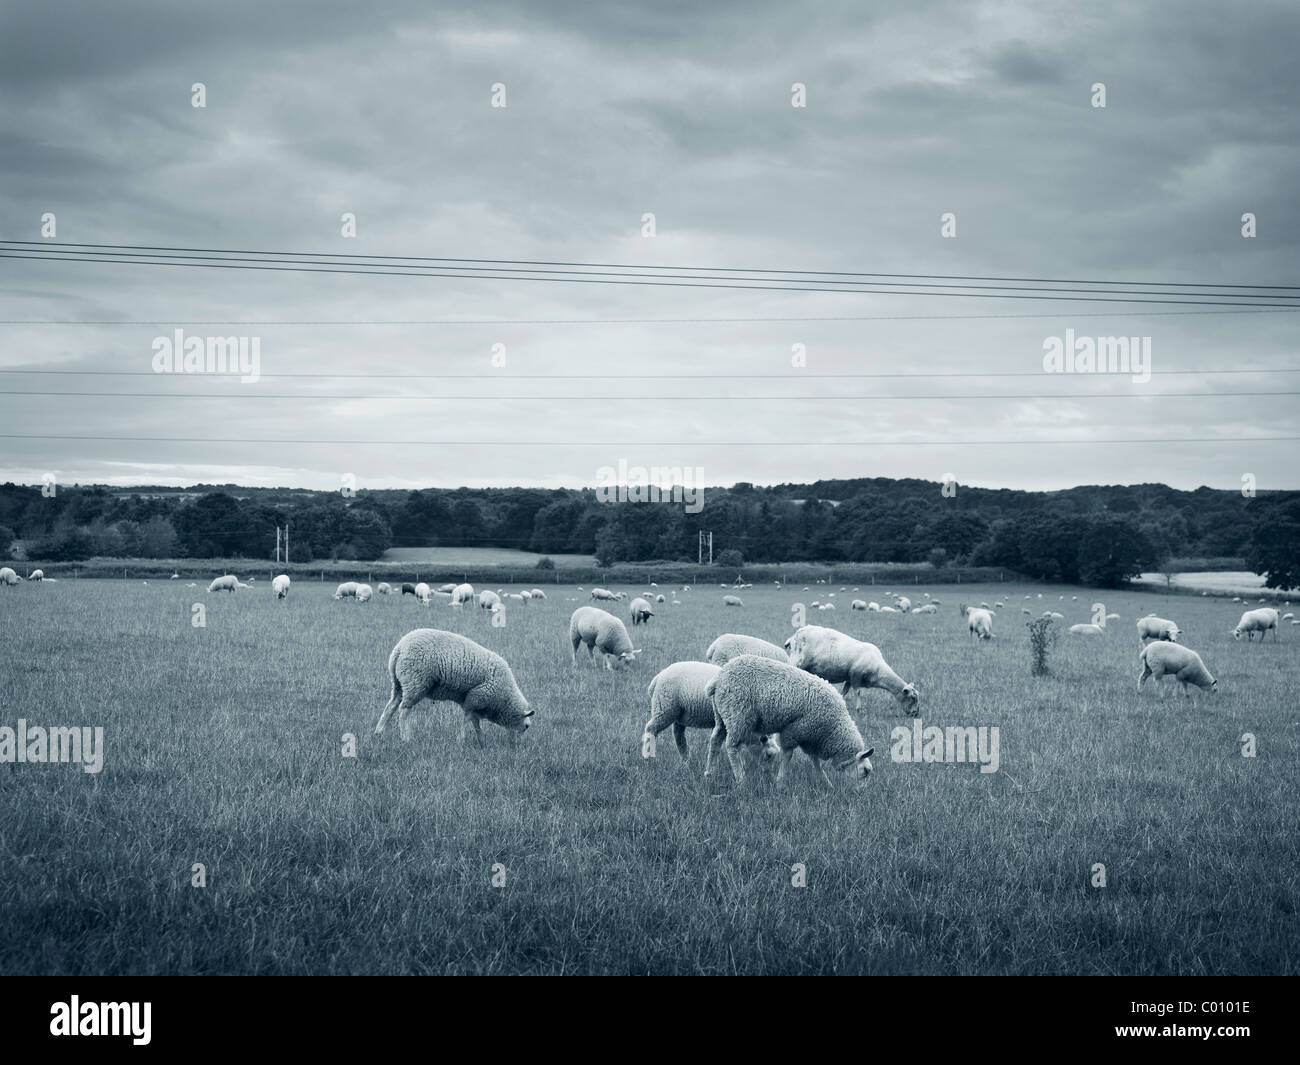 sheep grazing in a field at dusk in Cheshire farm land moulton Stock Photo